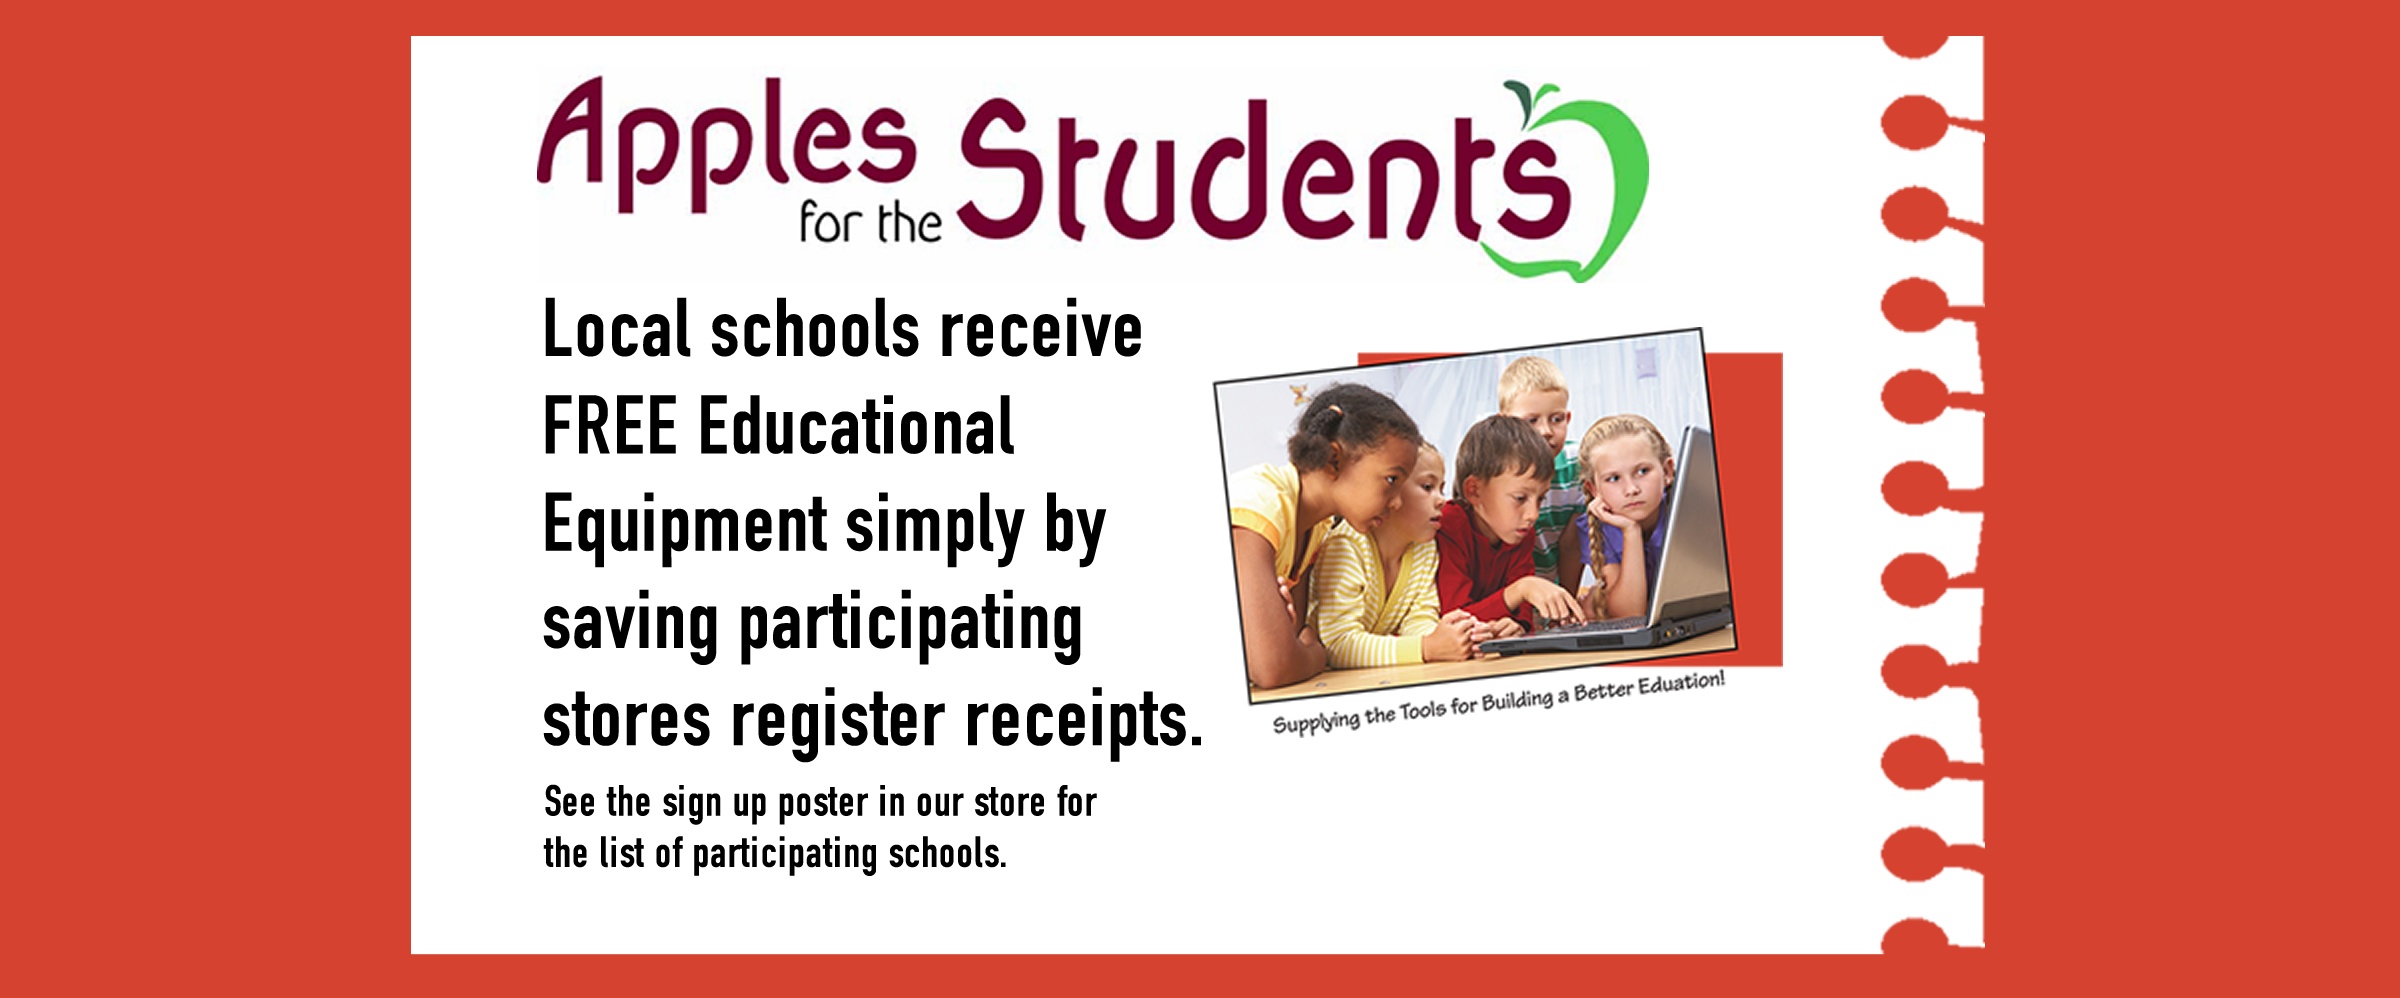 Apples for the Students: Local schools receive FREE Educational equipment simply by saving participating stores register receipts. See the sign up poster in our store for the list of participating schools.